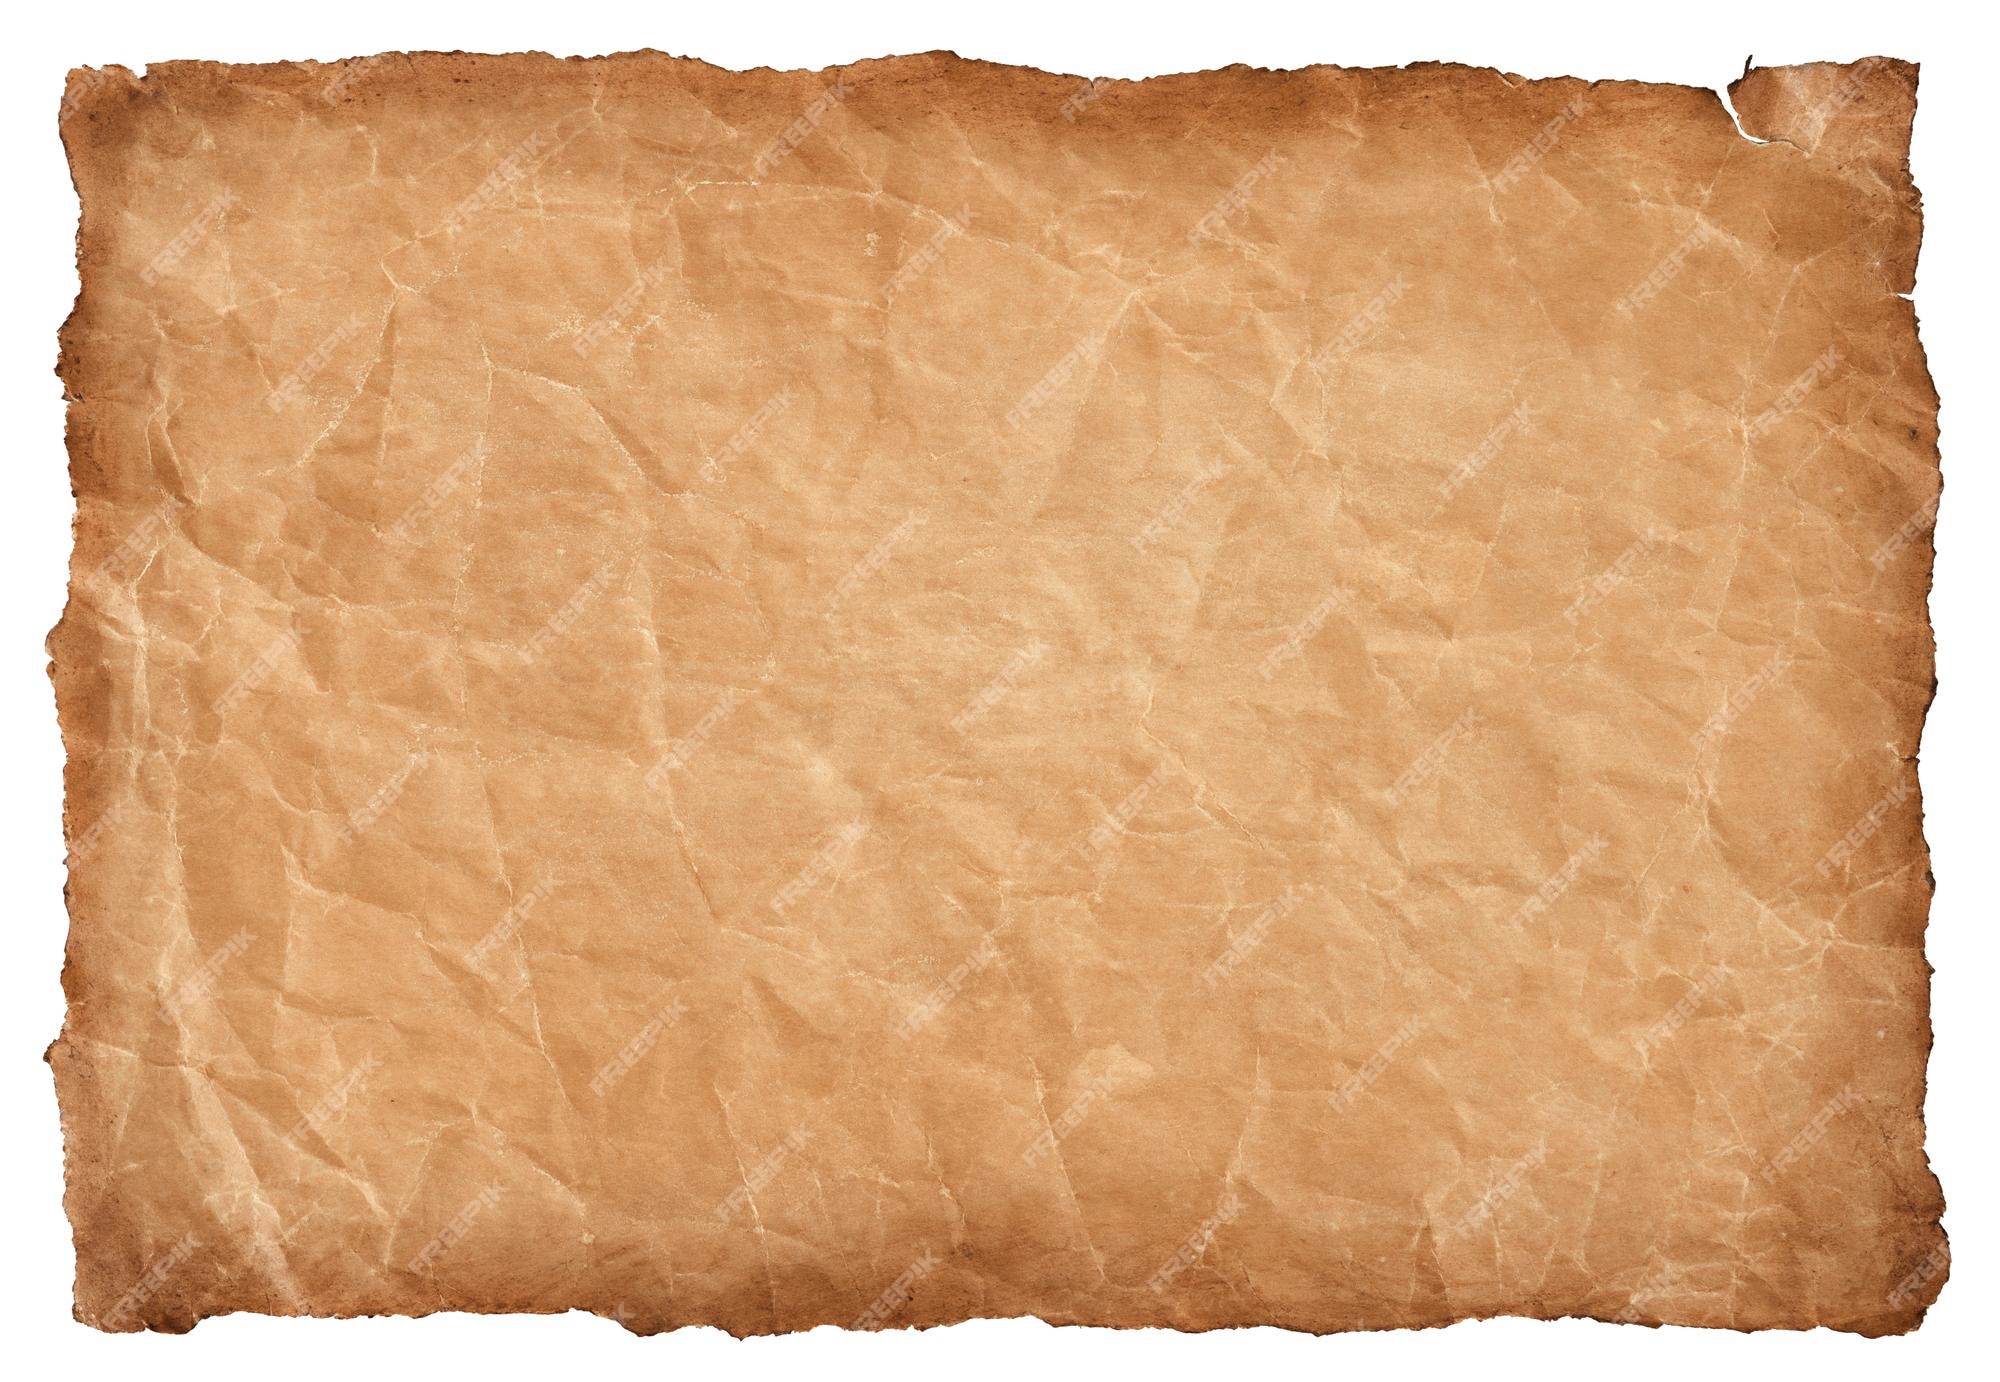 Old parchment paper texture or background Stock Photo by ©RoyStudio 11060123